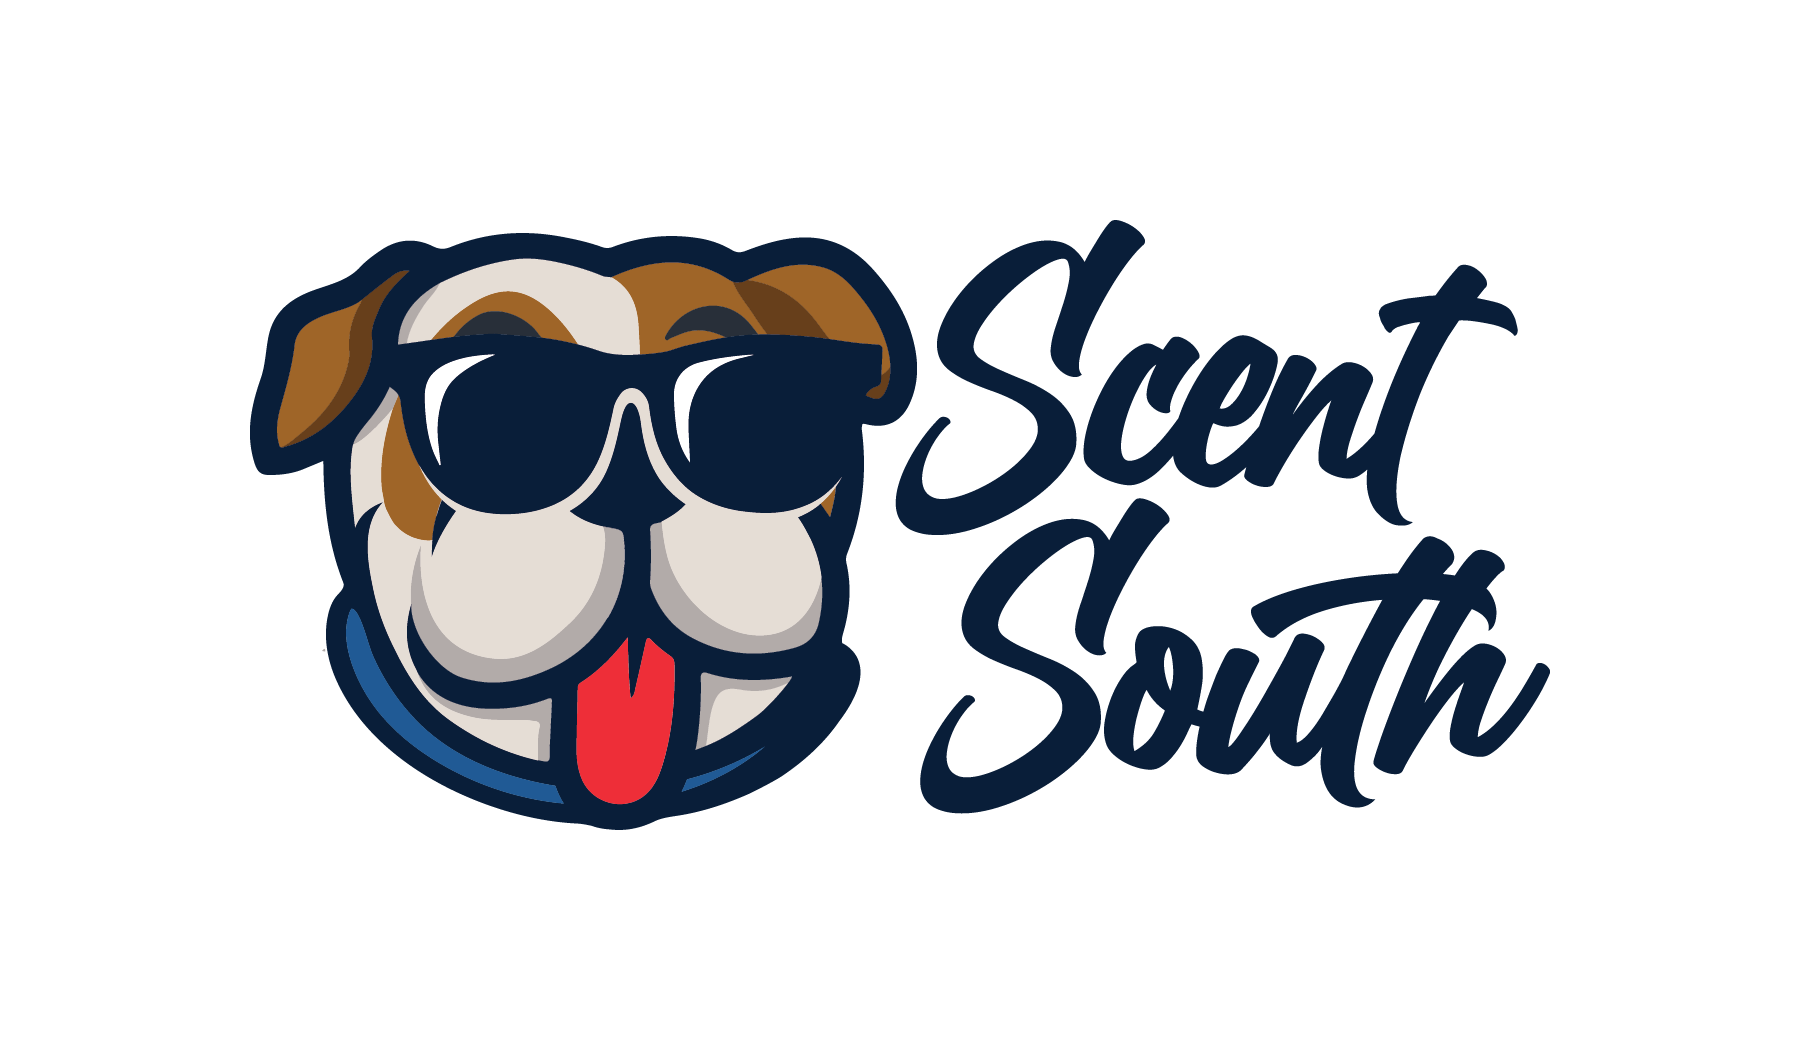 Scent South